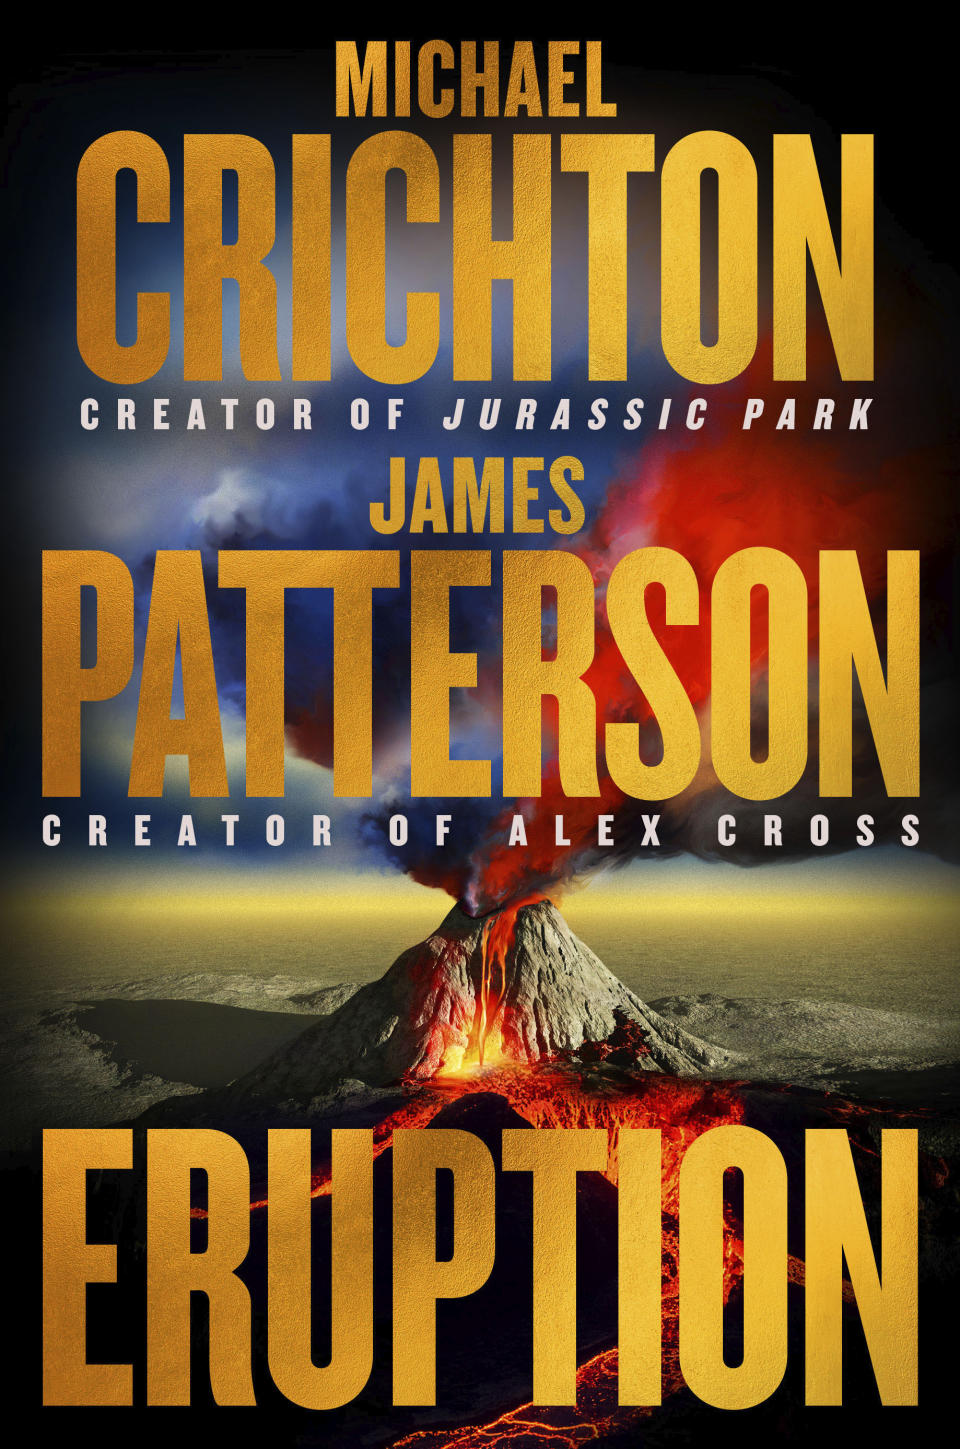 This cover image released by Little, Brown and Co. shows "Eruption" by Michael Crichton and James Patterson. (Little, Brown and Co. via AP)